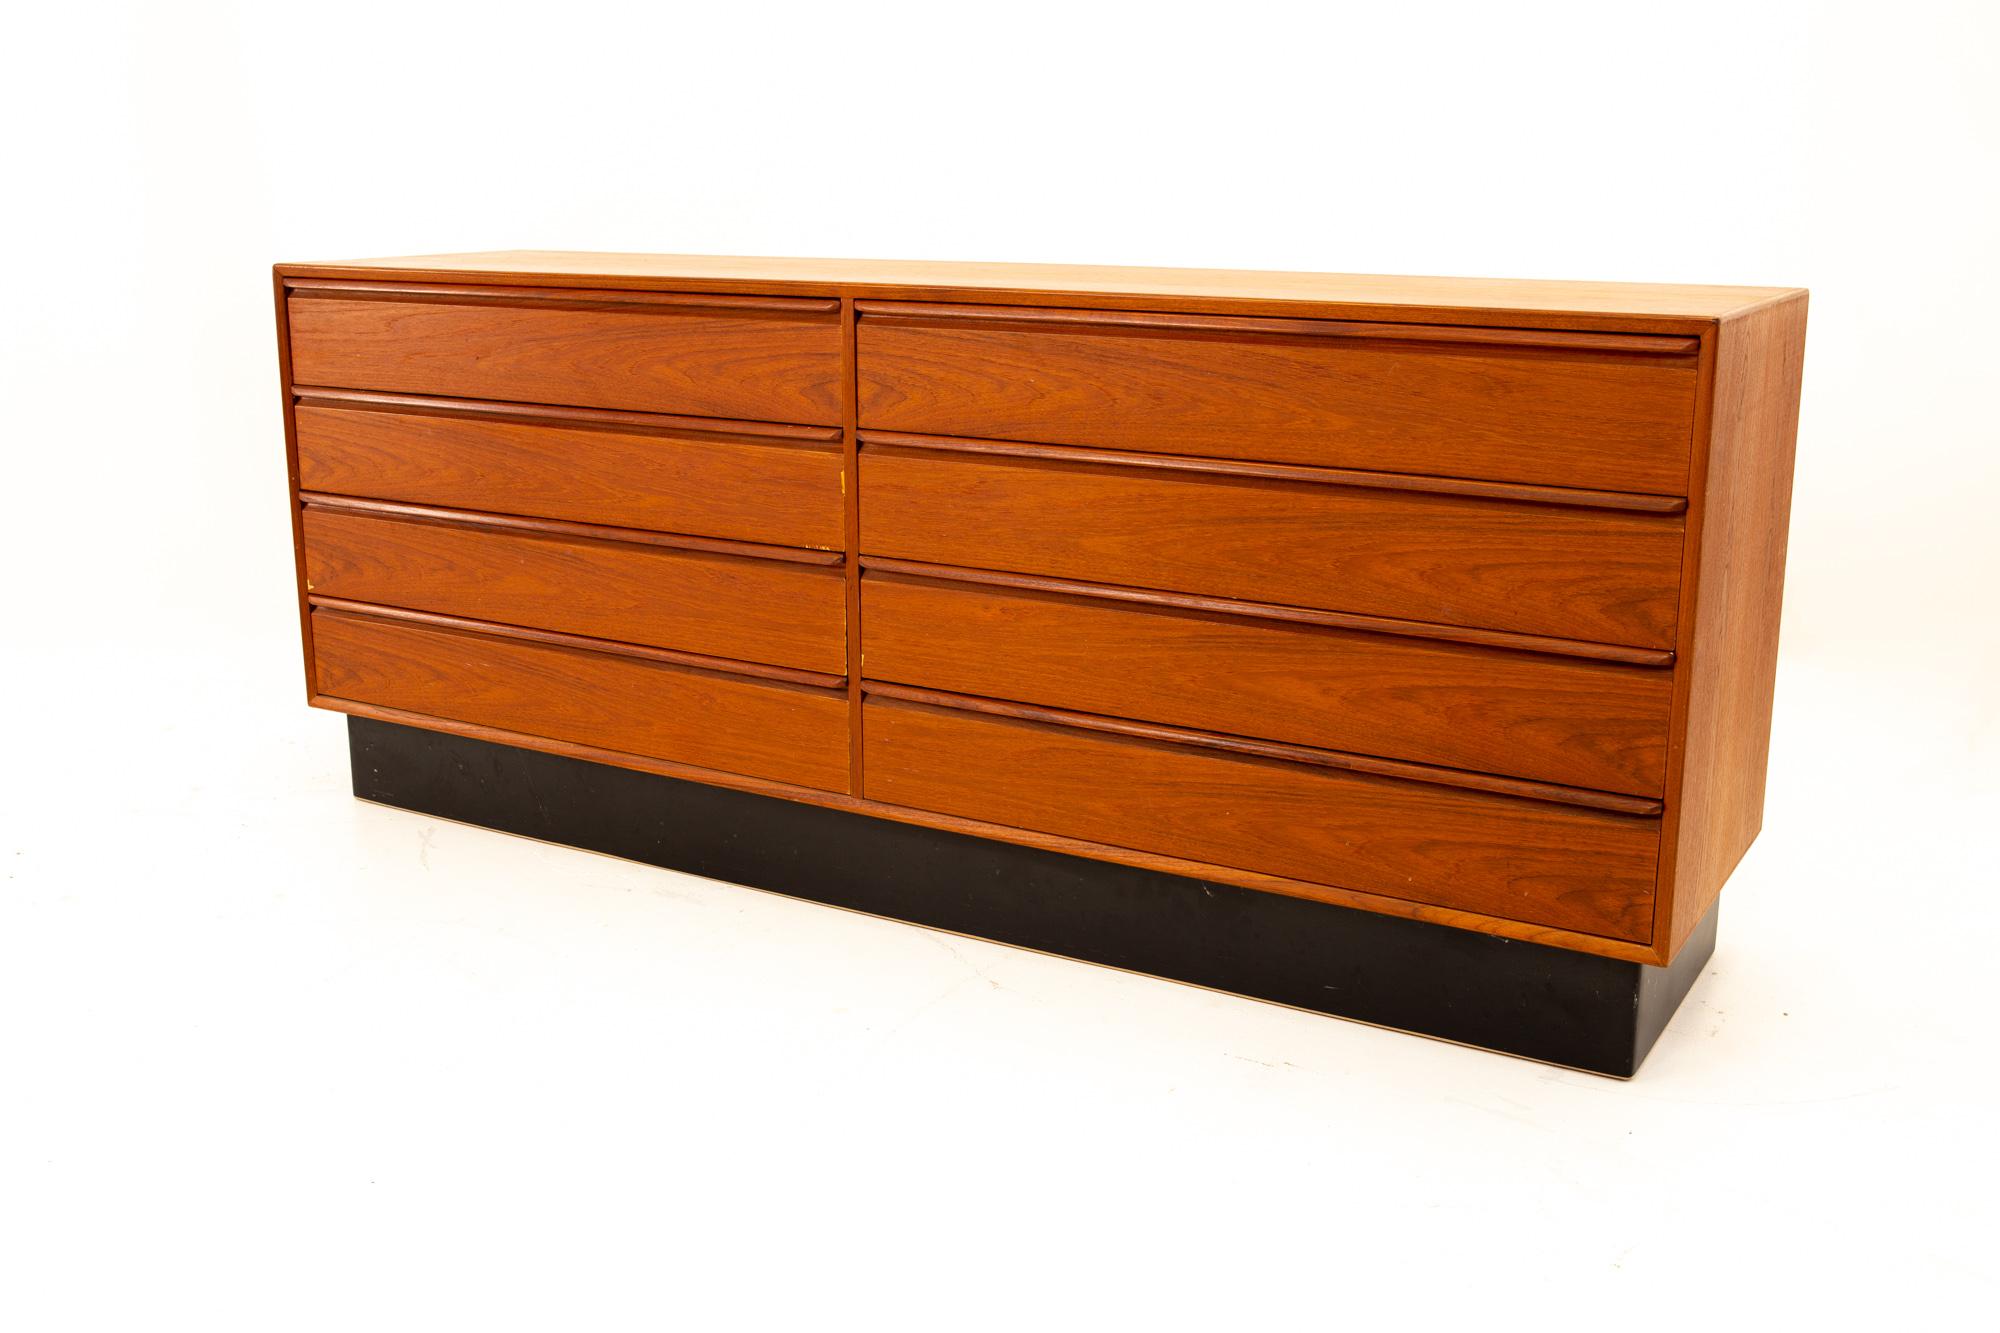 Westnofa mid century teak plinth base 8 drawer lowboy dresser
Dresser measures: 71.5 wide x 18 deep x 29 high

All pieces of furniture can be had in what we call restored vintage condition. That means the piece is restored upon purchase so it’s